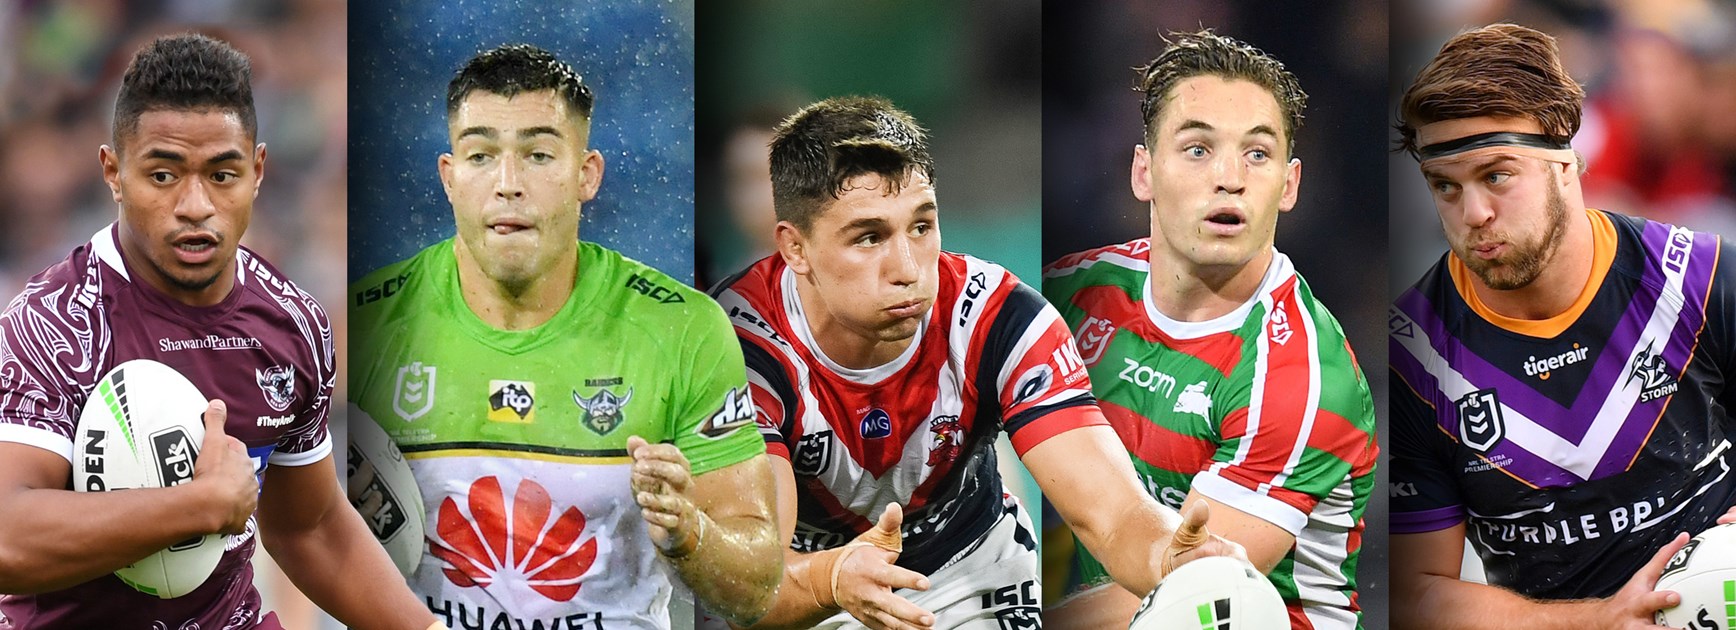 Rep debut: NRL.com experts have their say on who’ll break through